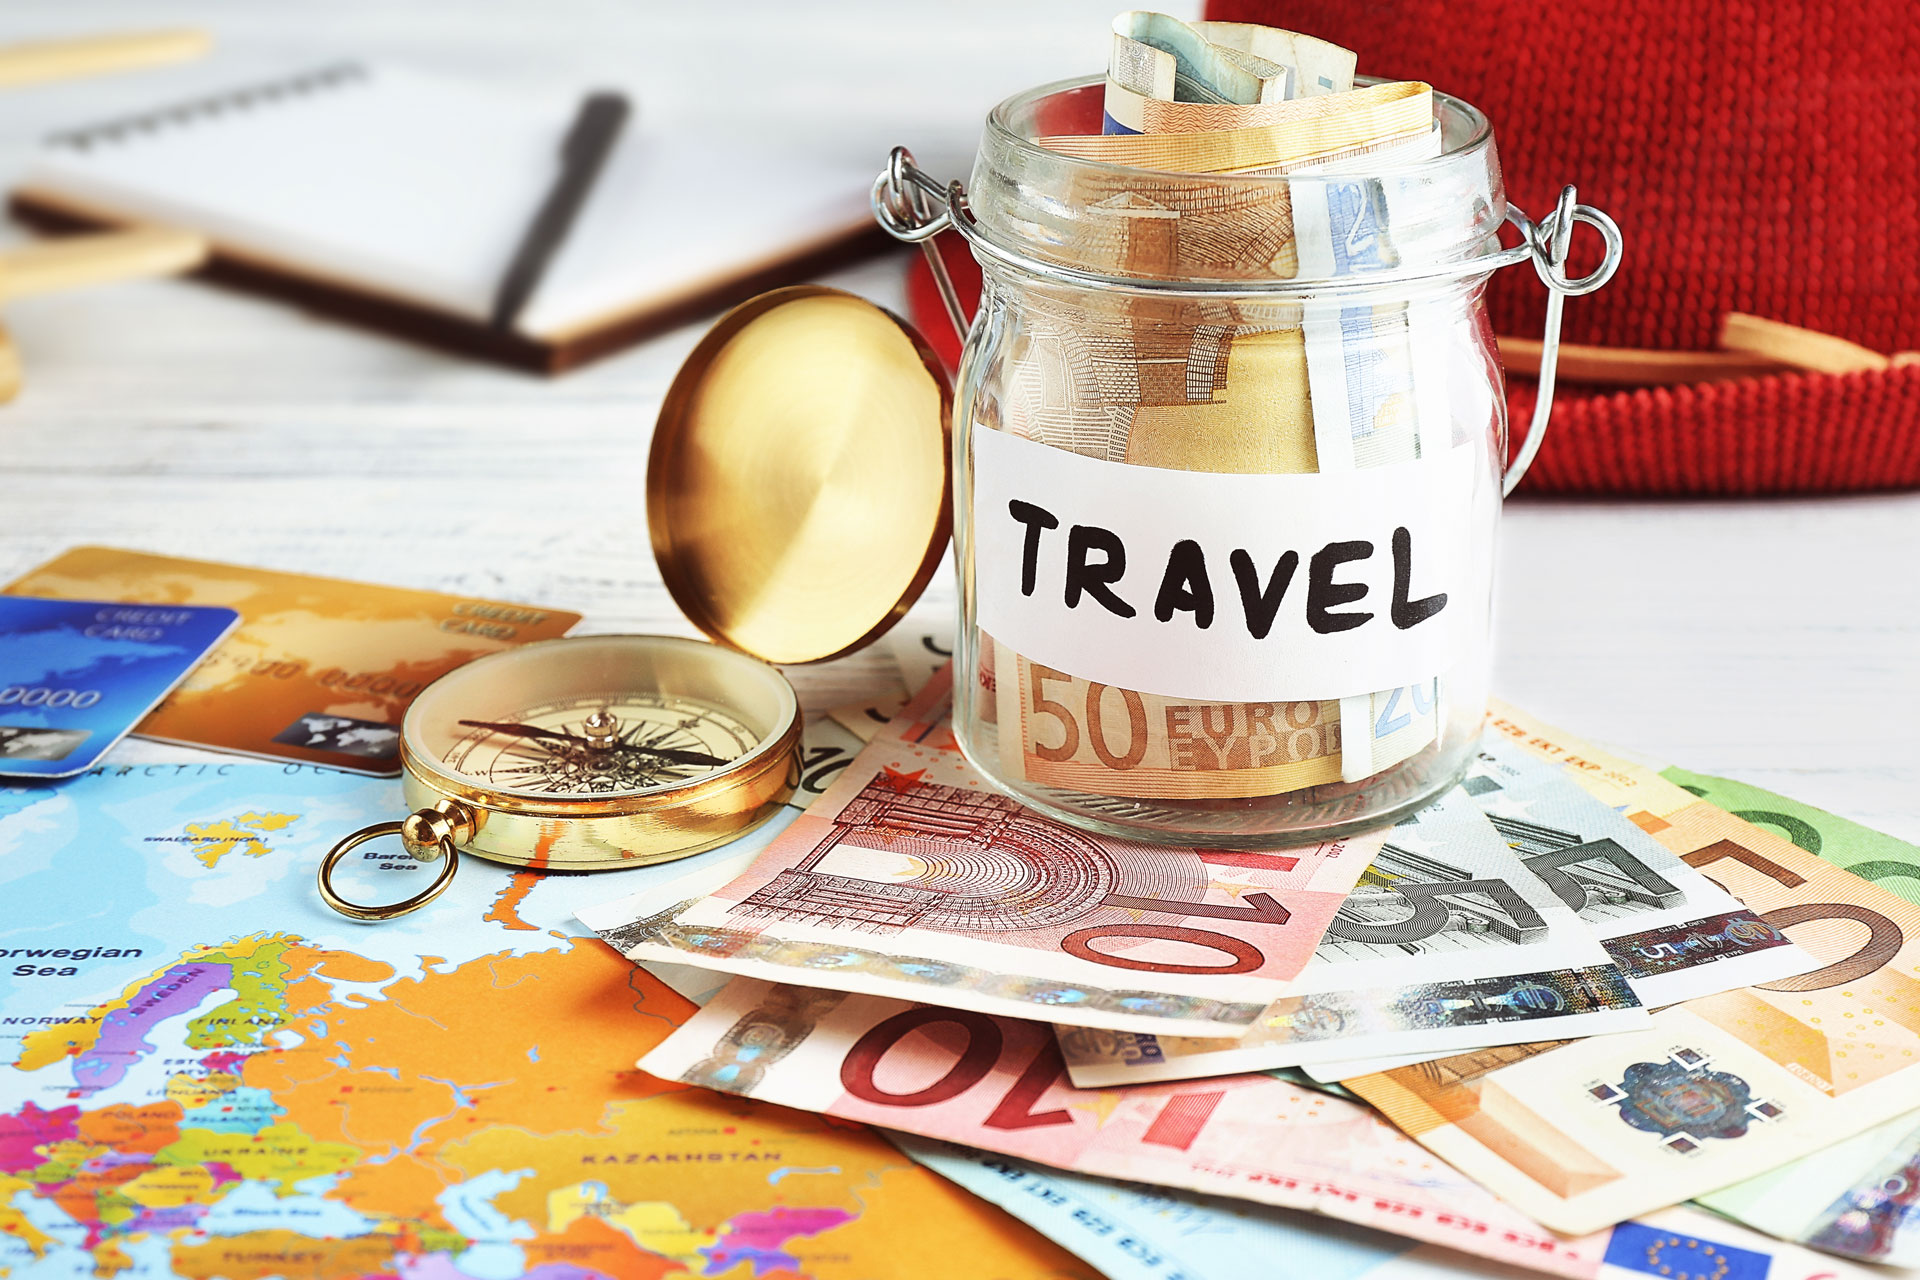 Travel Advice for Exploring the World on a Tight Budget